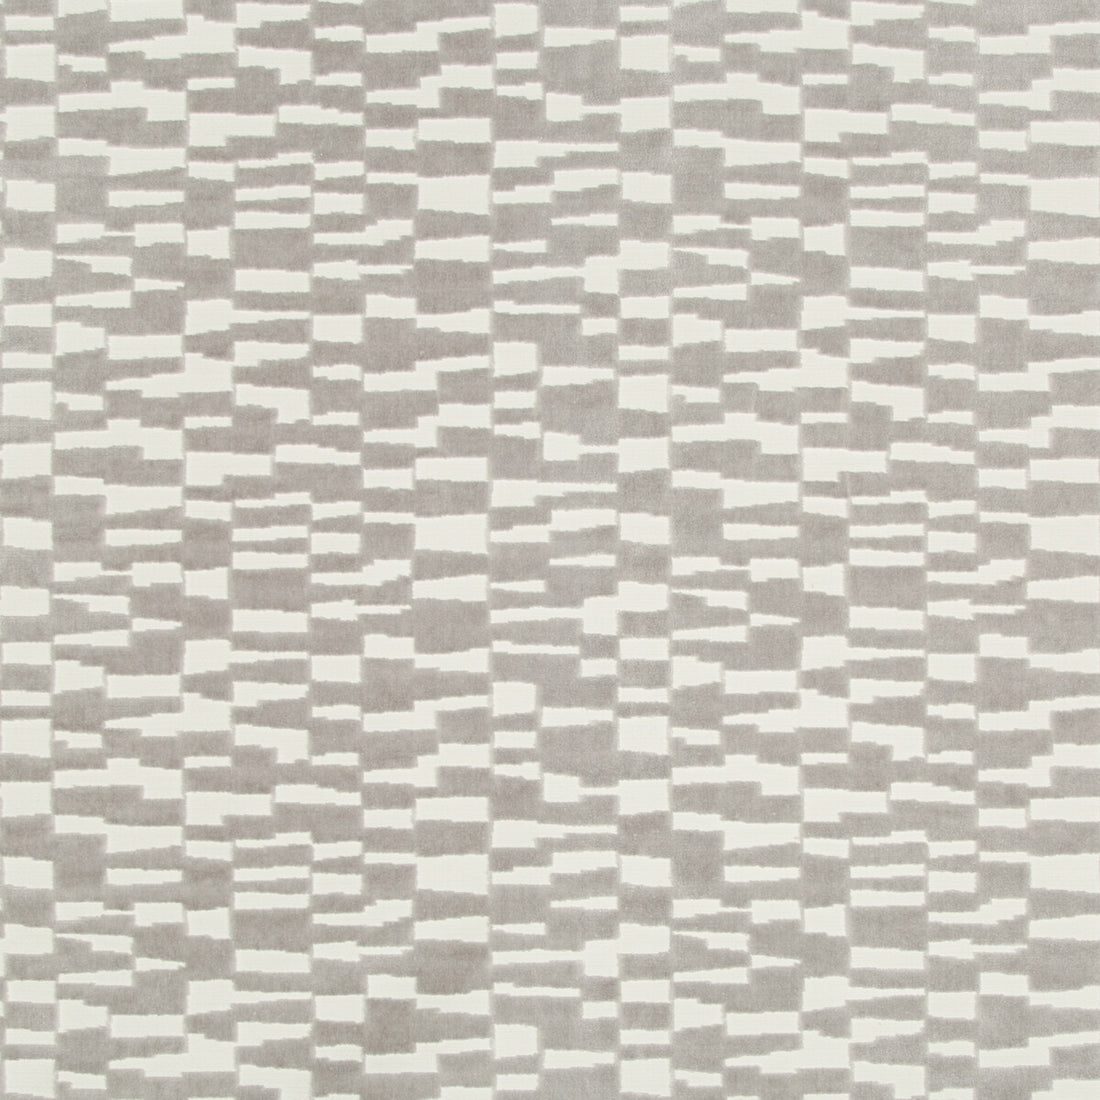 Mod Velvet fabric in steel color - pattern 35544.11.0 - by Kravet Basics in the Bermuda collection